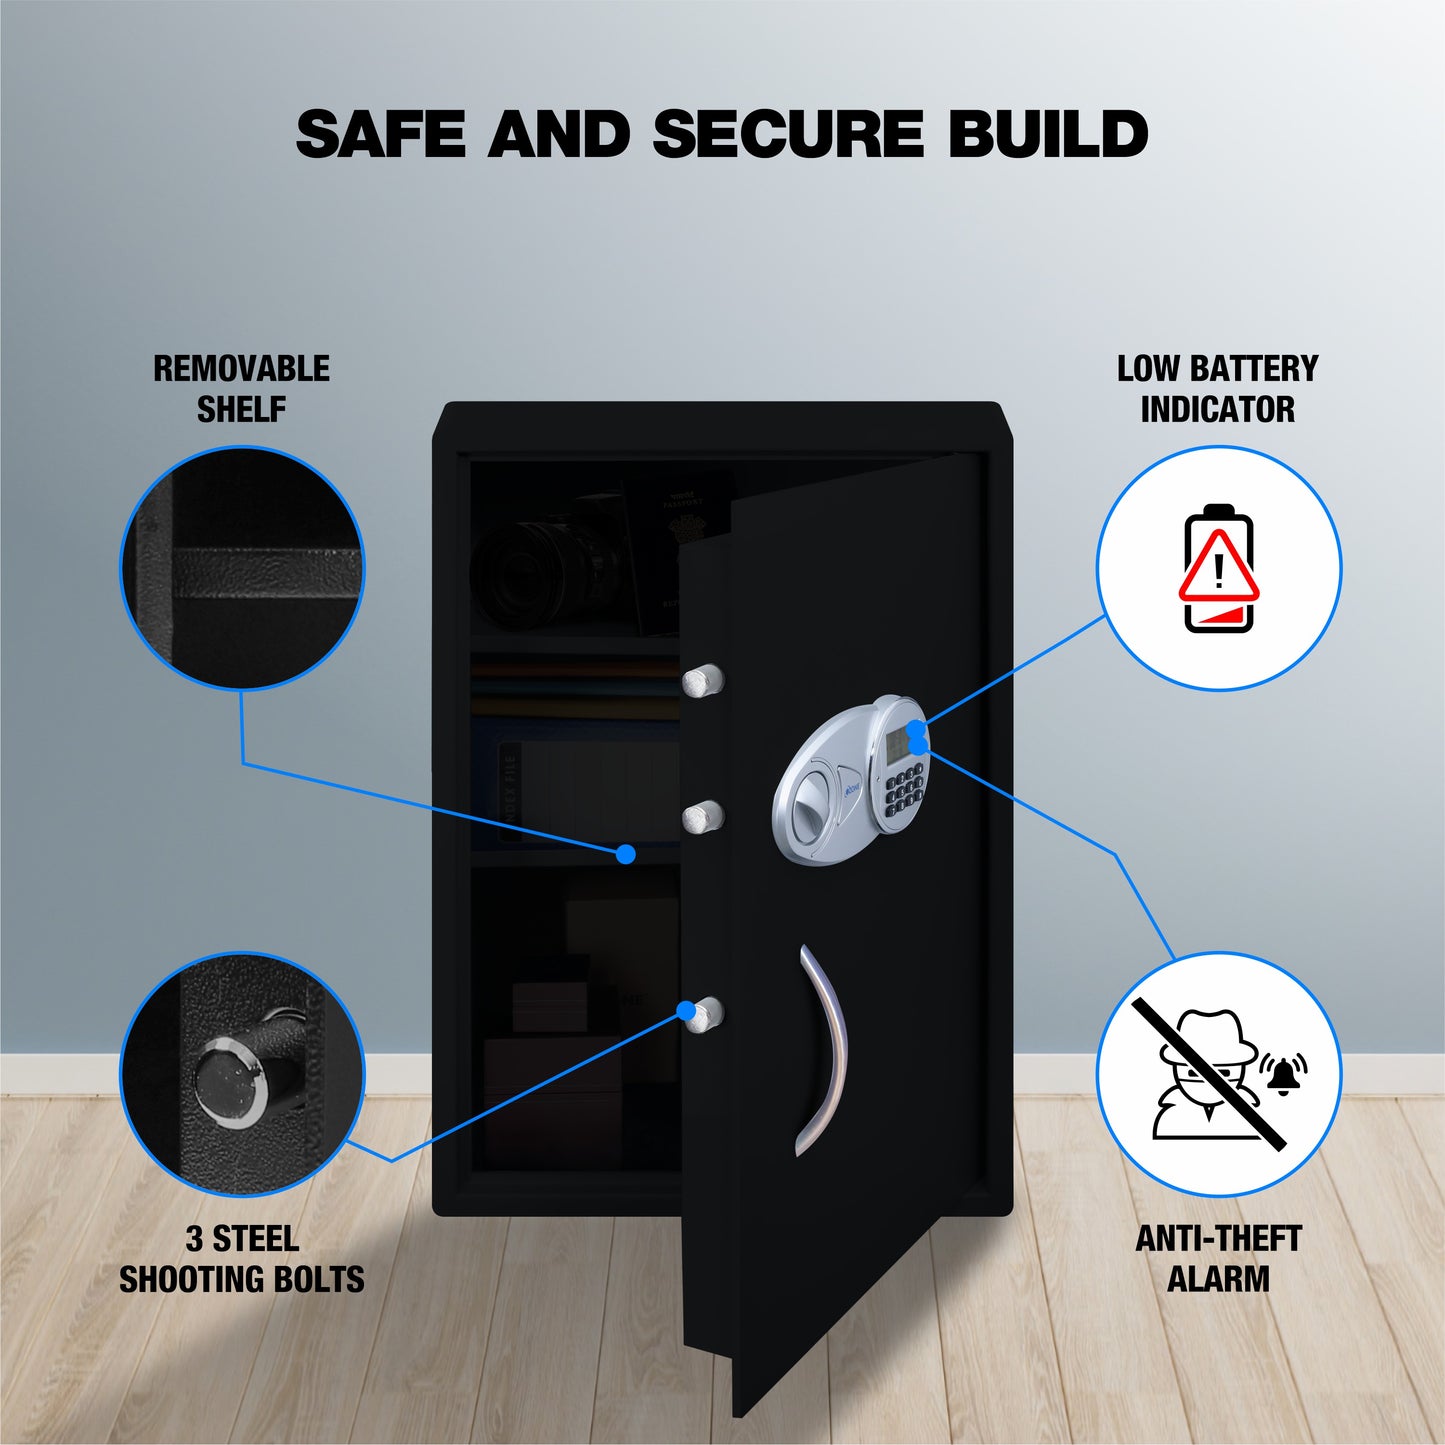 Ozone Multi-purpose Safe for Homes & Retail Spaces | 2-way Access | Password & Emergency Key (Black & Grey, 95.4 Ltrs.)